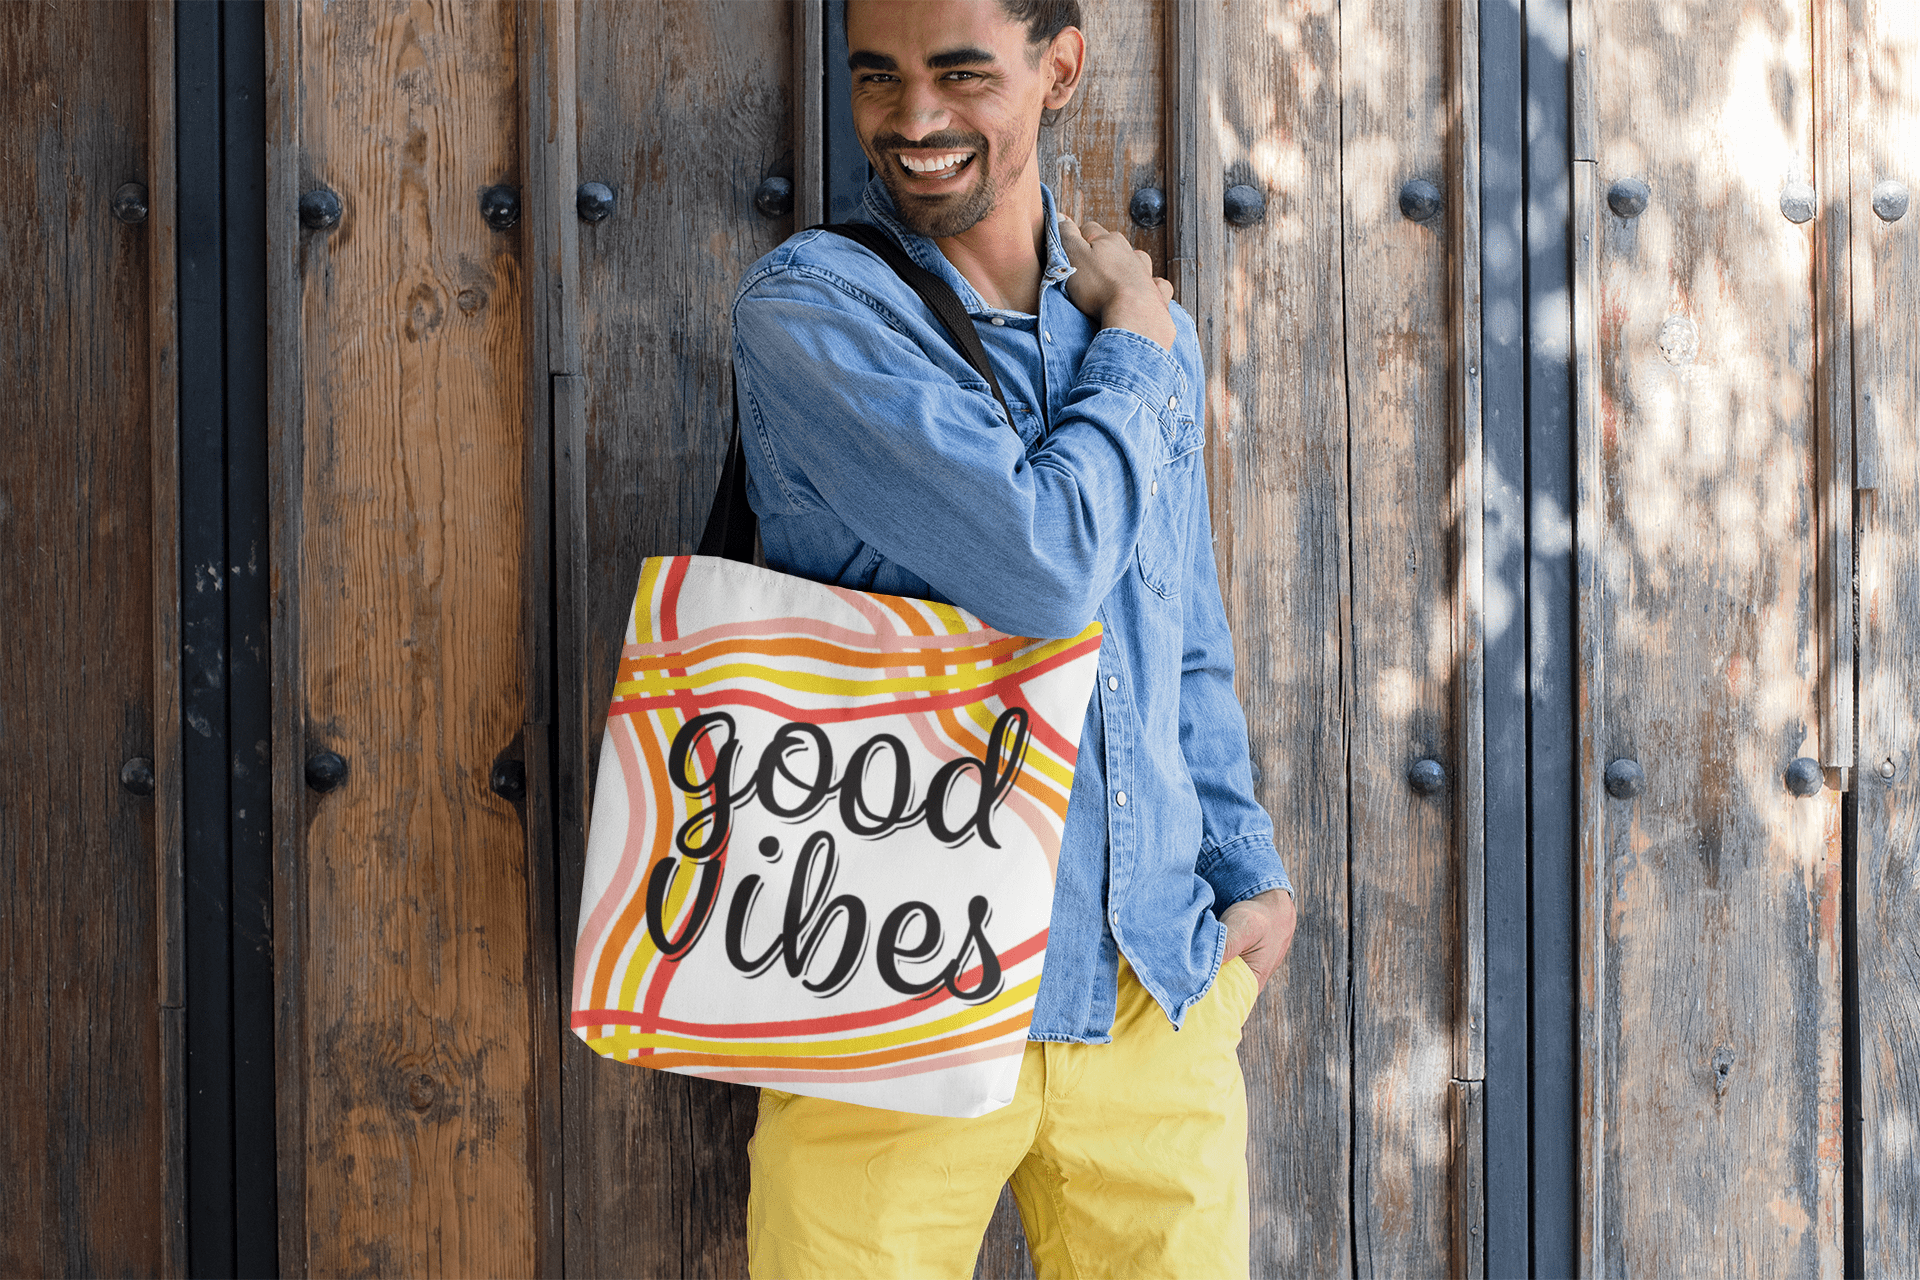 Good Vibes Waves Tote Shopping Tote Shopper Bag - White Bags - Shopping bags A Moment Of Now Women’s Boutique Clothing Online Lifestyle Store